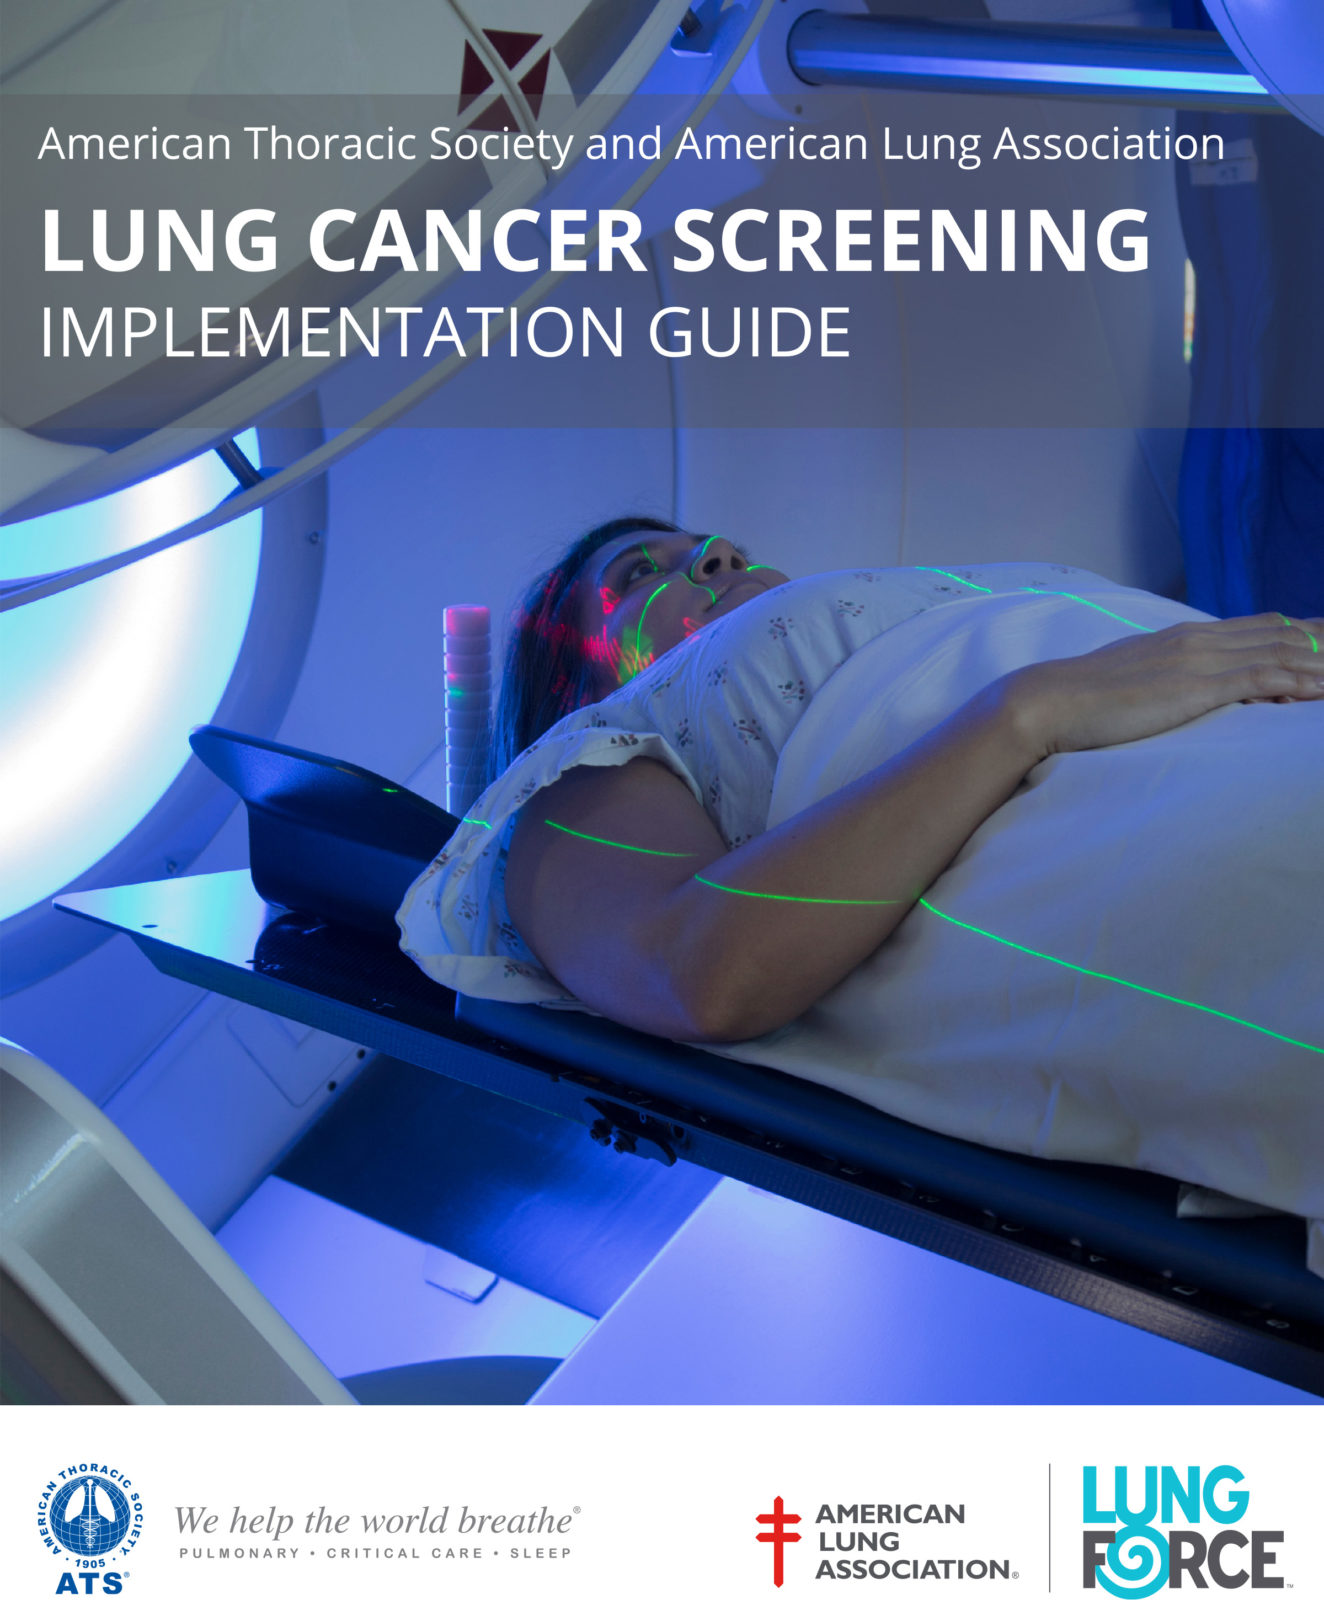 American Thoracic Society & American Lung Association Implementation Guide for Lung Cancer Screening